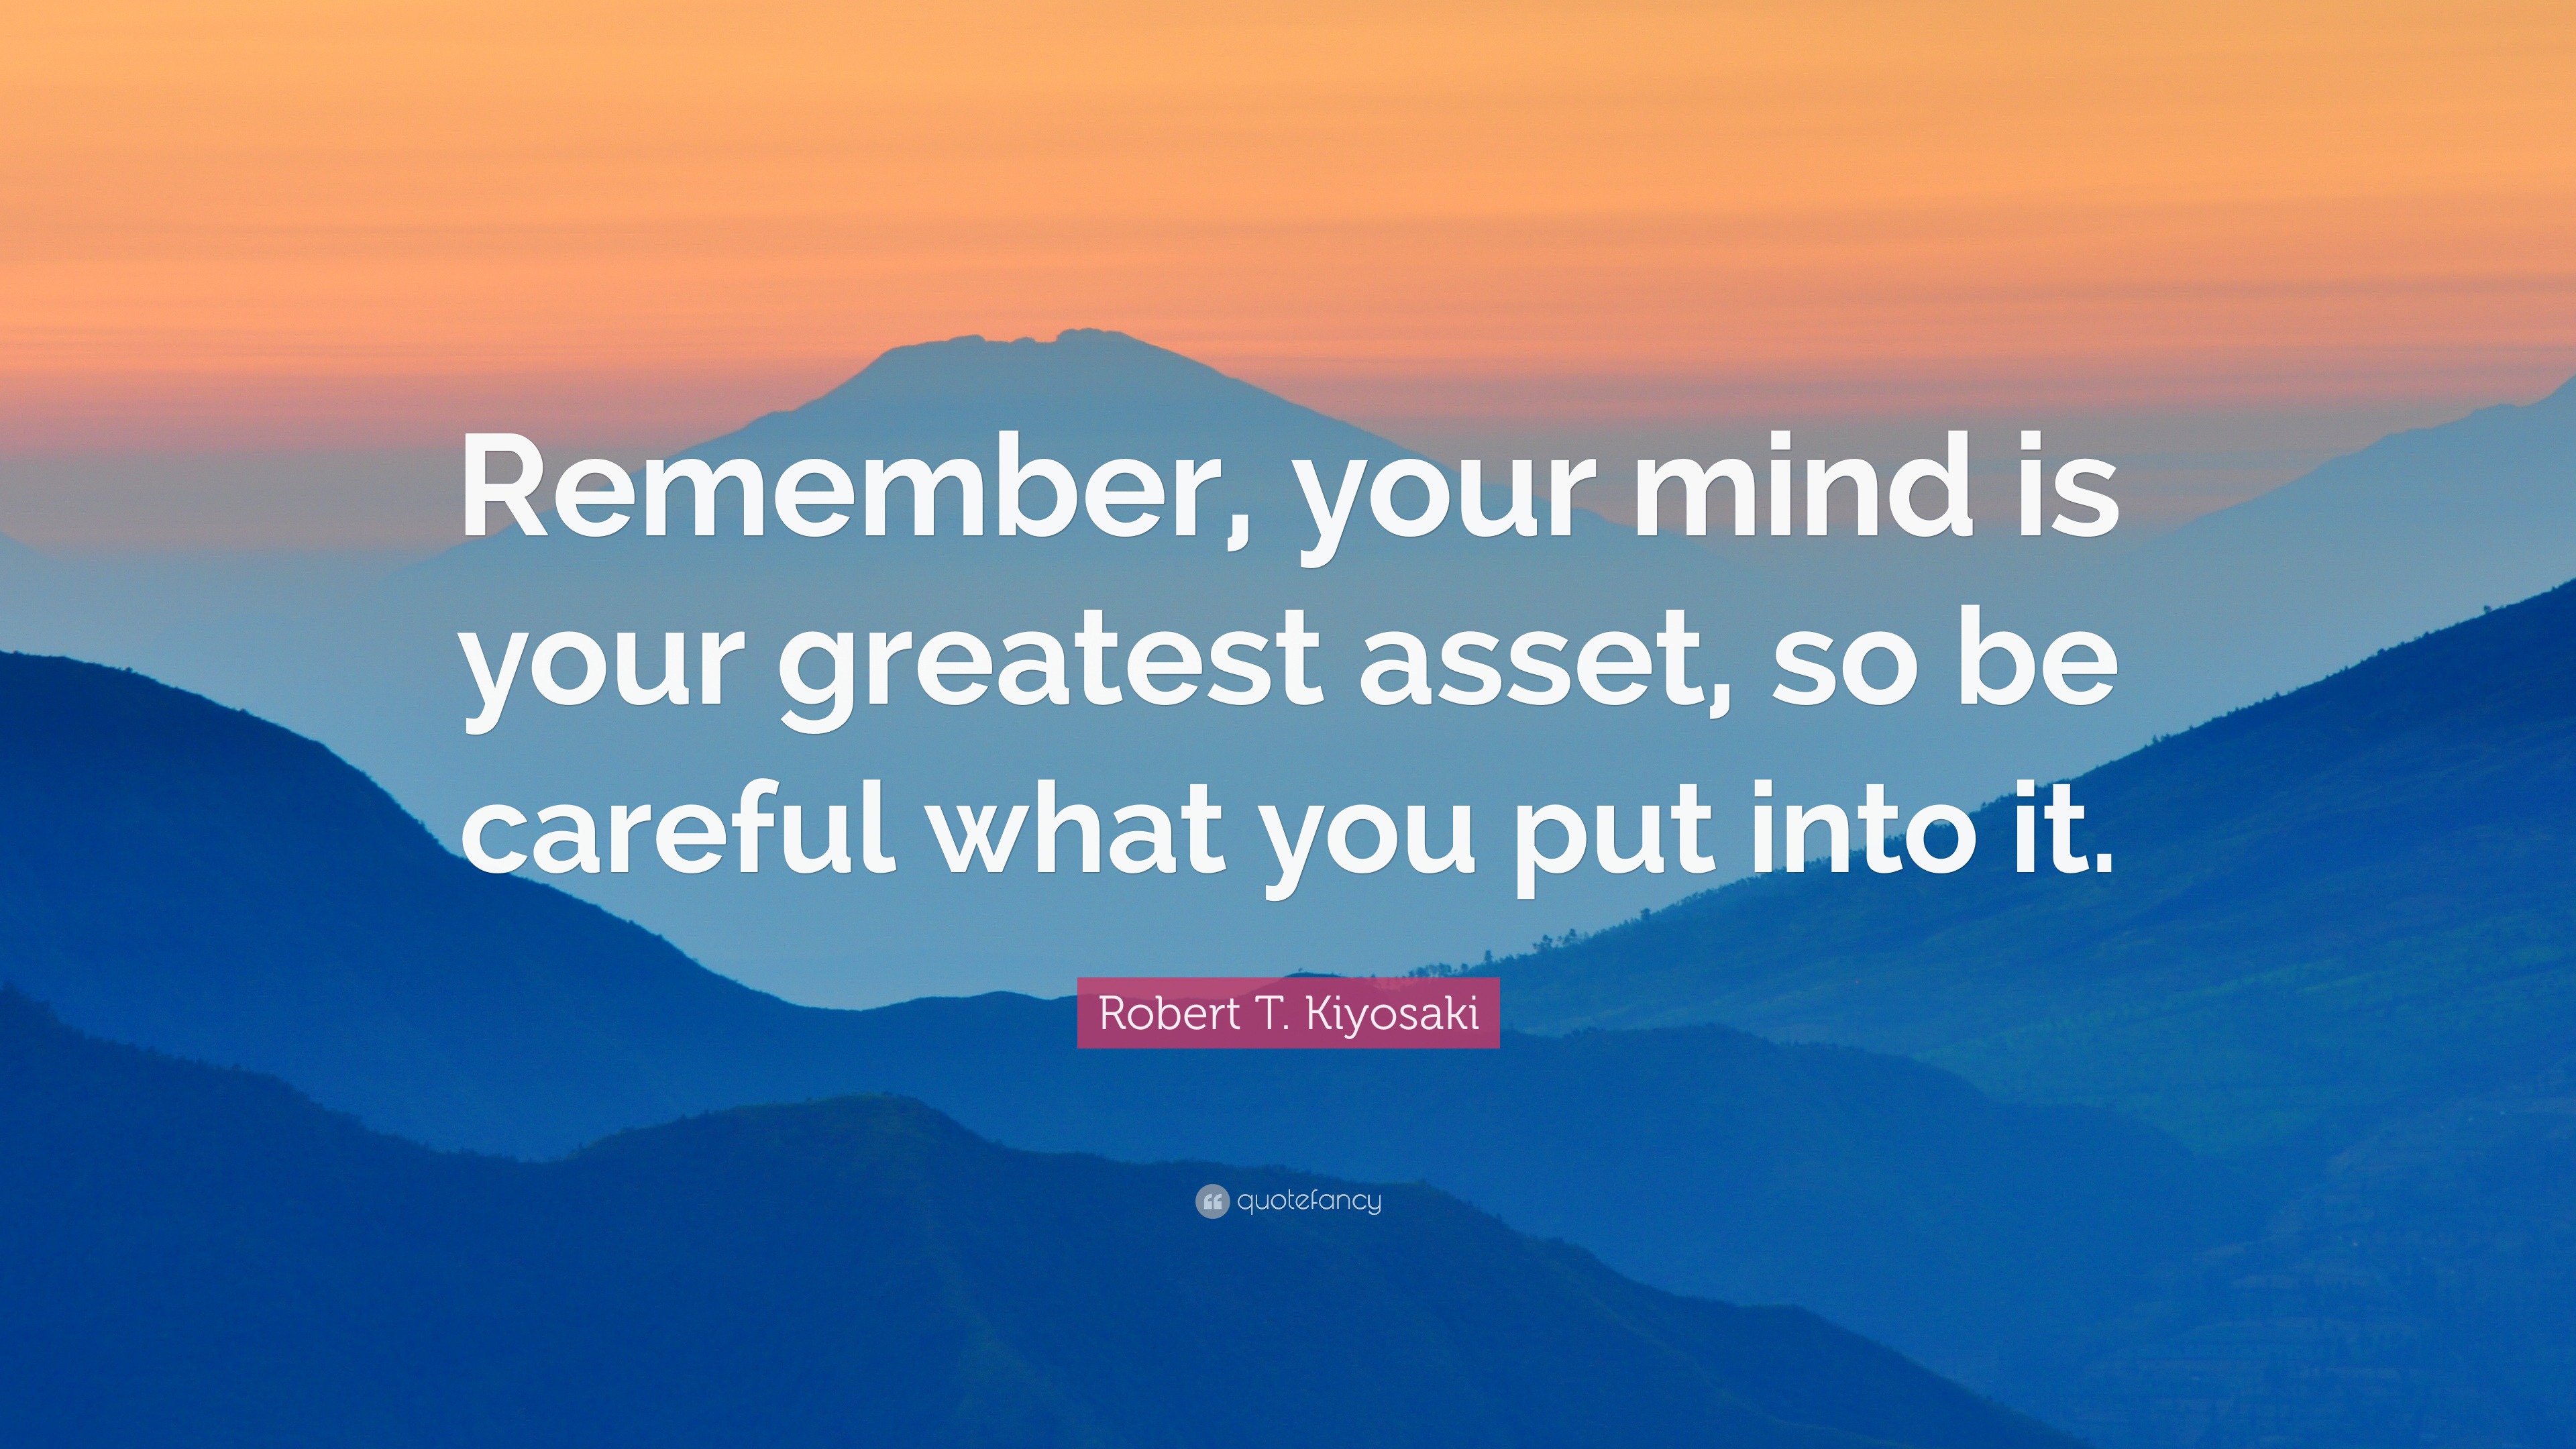 Robert T Kiyosaki Quote  Remember your  mind  is your  